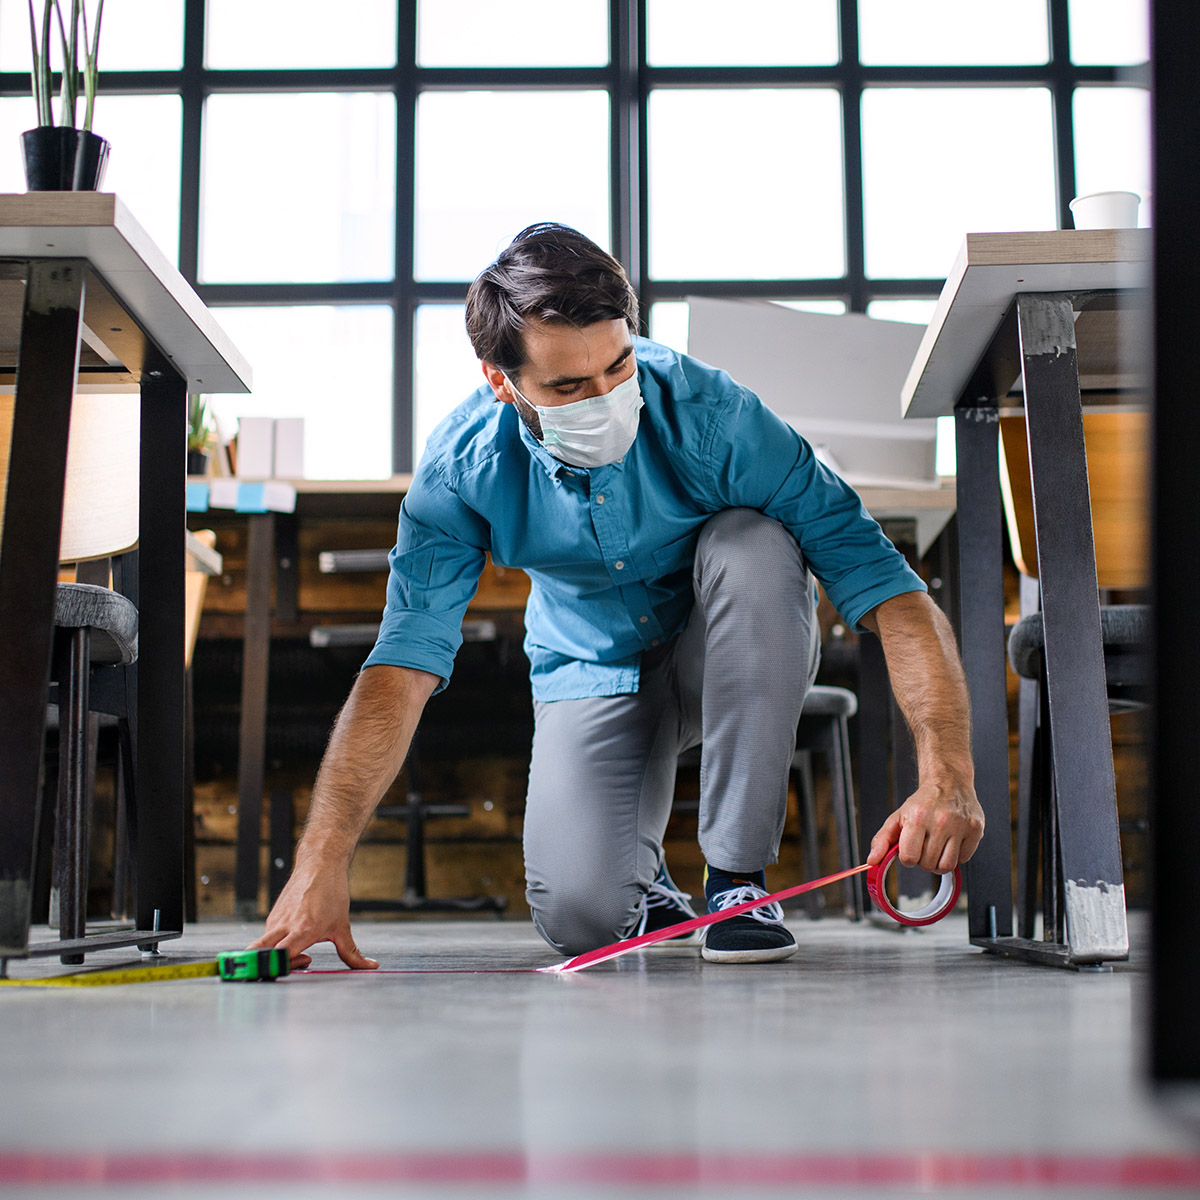 Man wearing a mask crouches on the floor while measuring and marking the distance between tables.